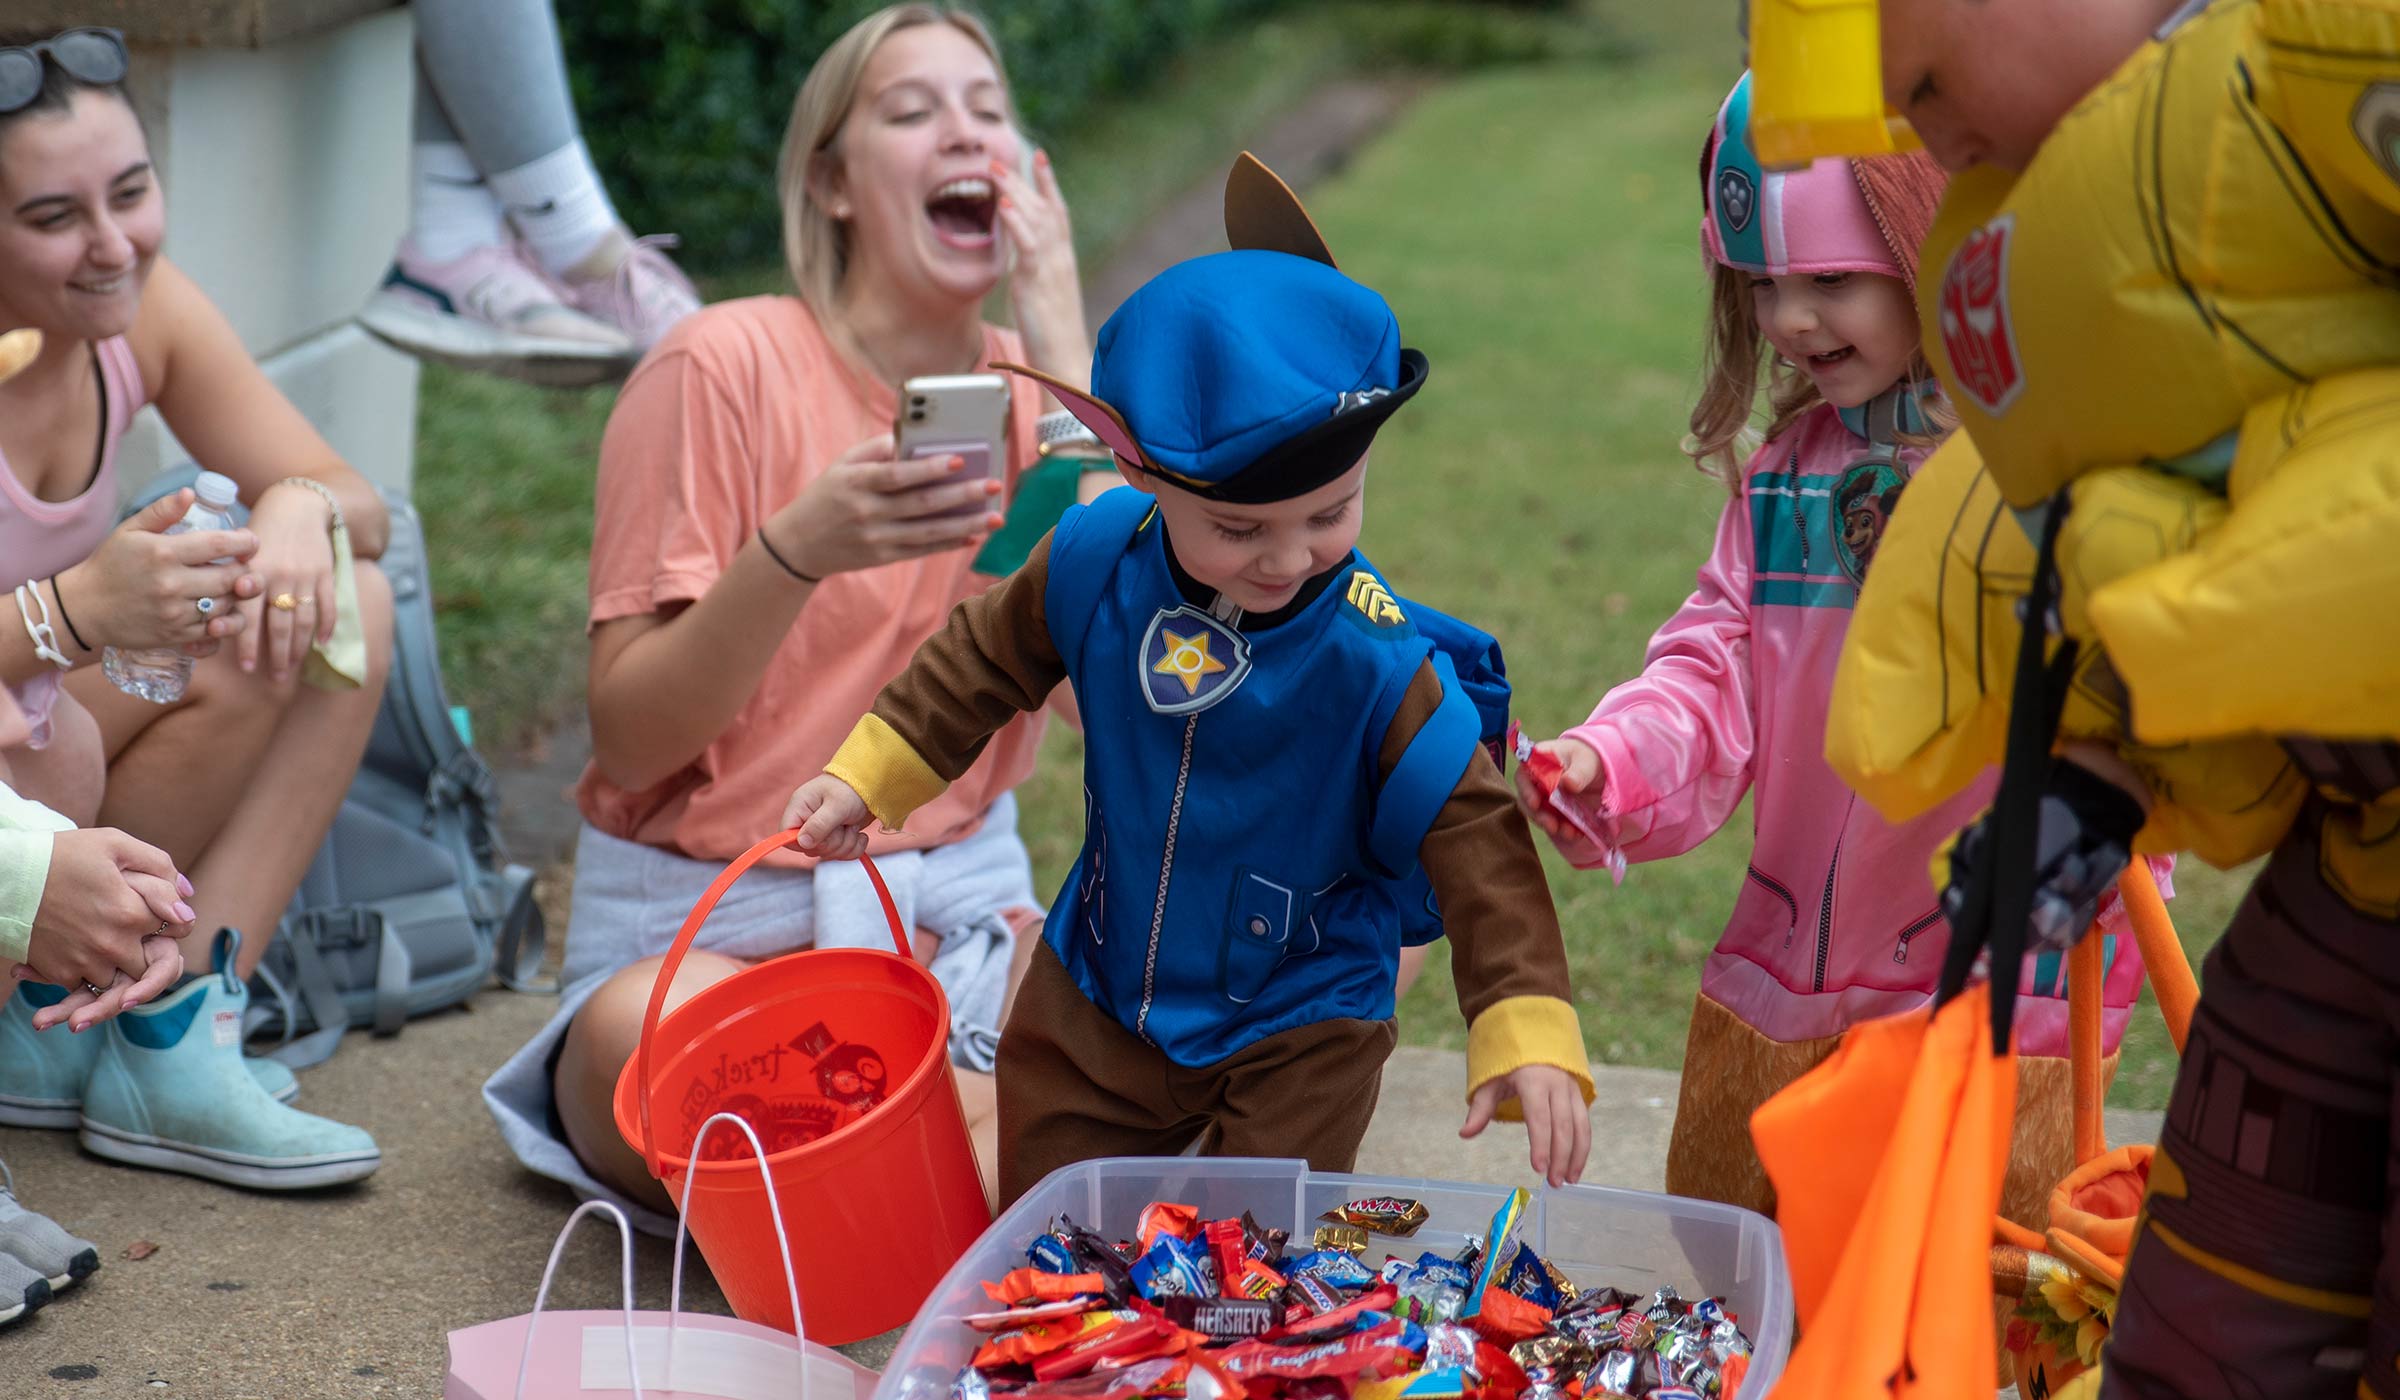 Kids in paw patrol and transformer costumes getting candy out of bin